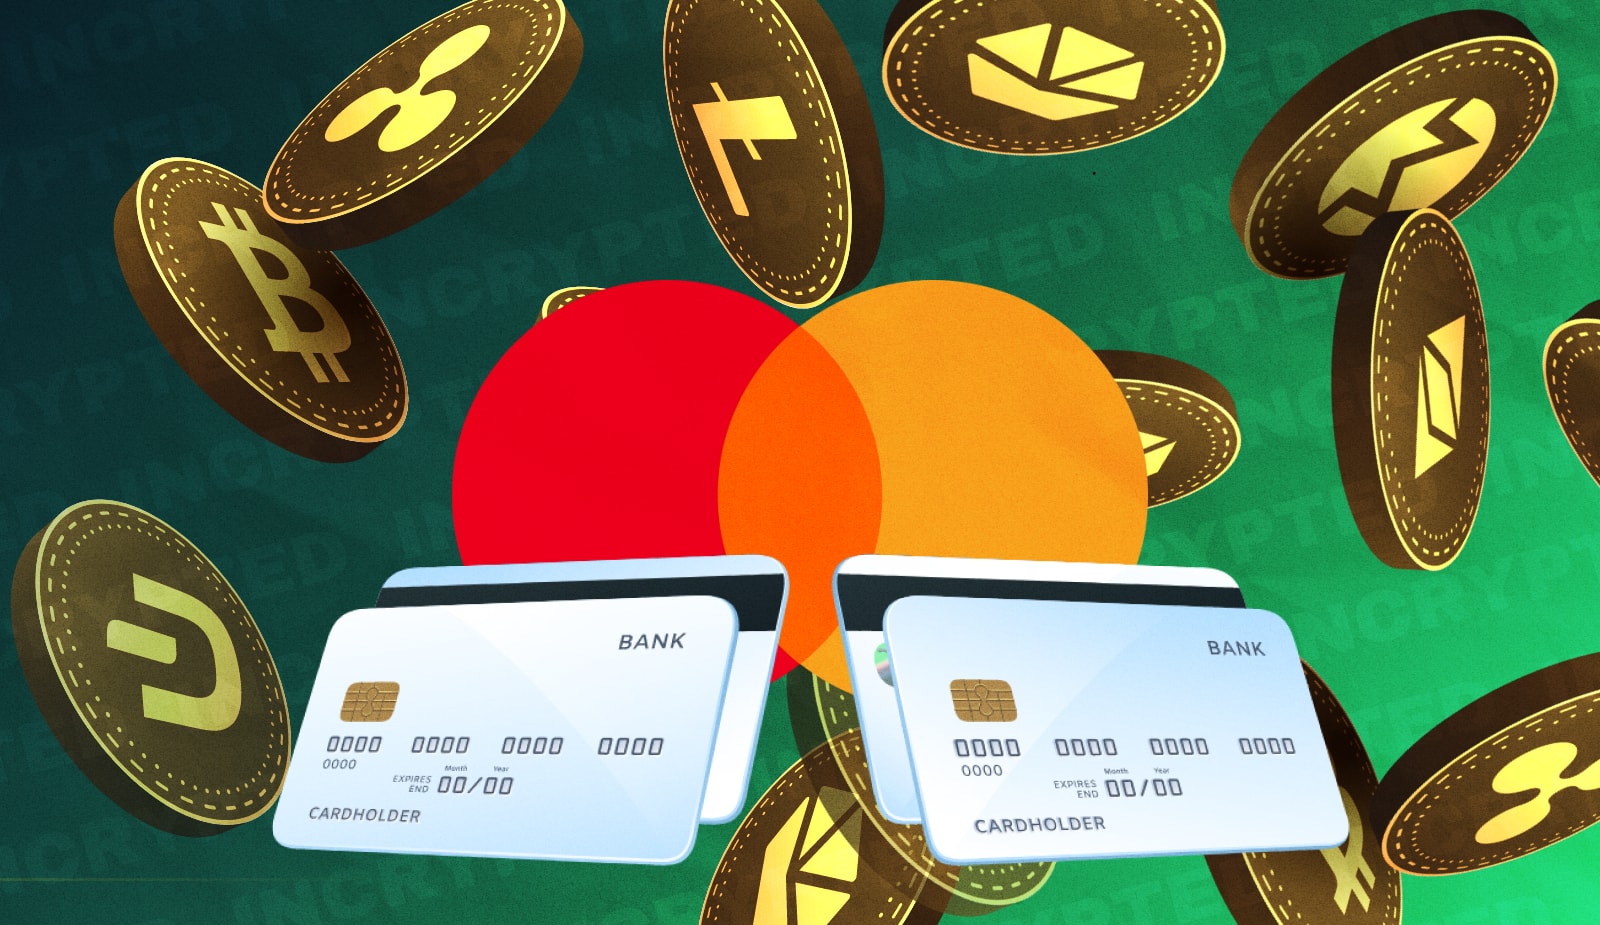 Mastercard will help banks process crypto payments